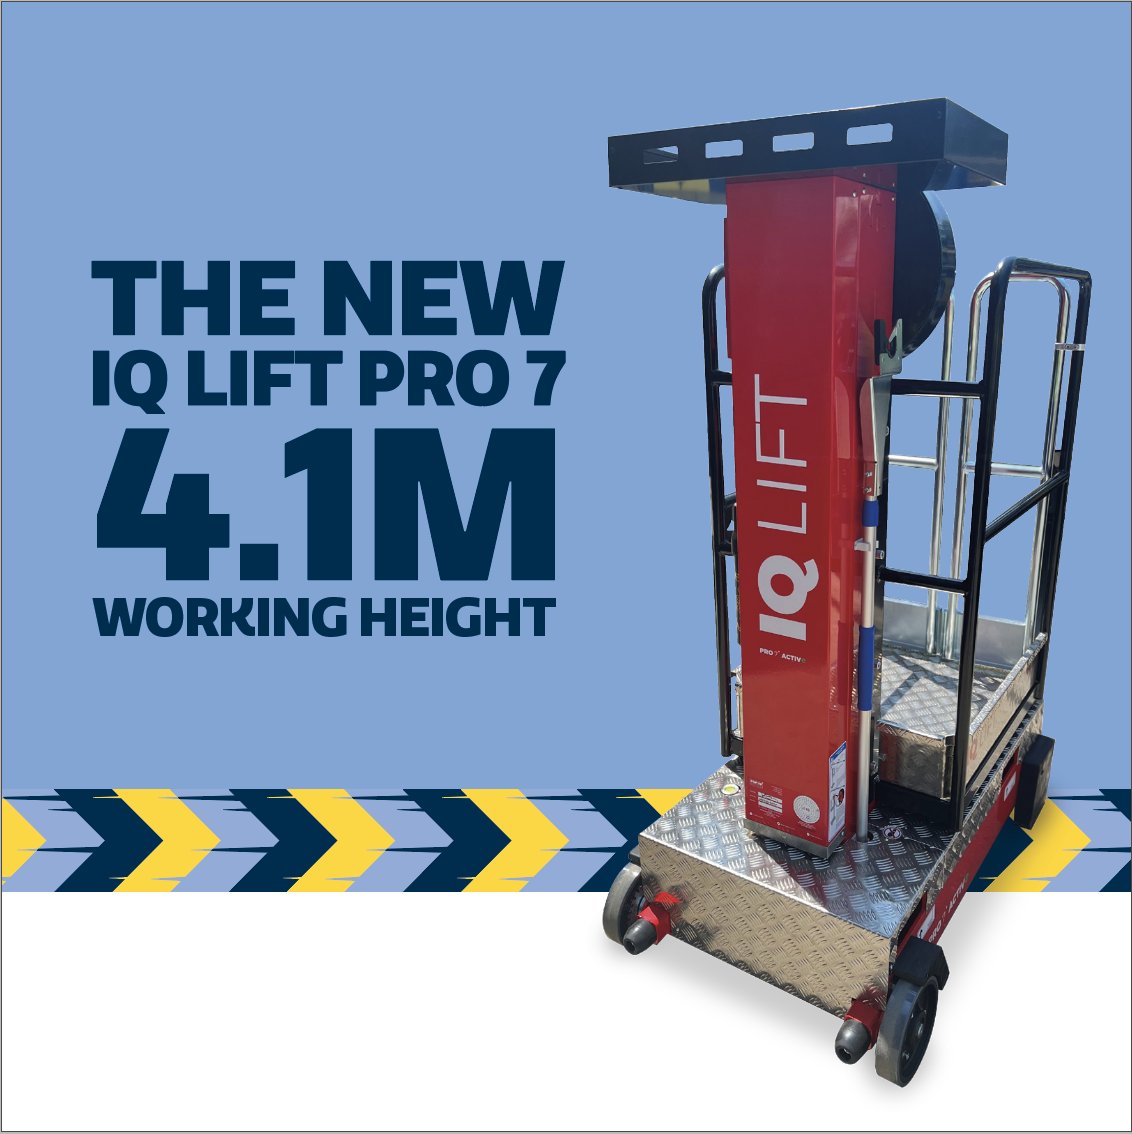 We’re among the first hirers in the South-East to offer the IQ Lift Pro 7. A manual push access platform that is part of our low-level range. With a unique raising mechanism, it requires no power to reach a working height of 4.1m. Hire yours today: ow.ly/GGii50P4S0z